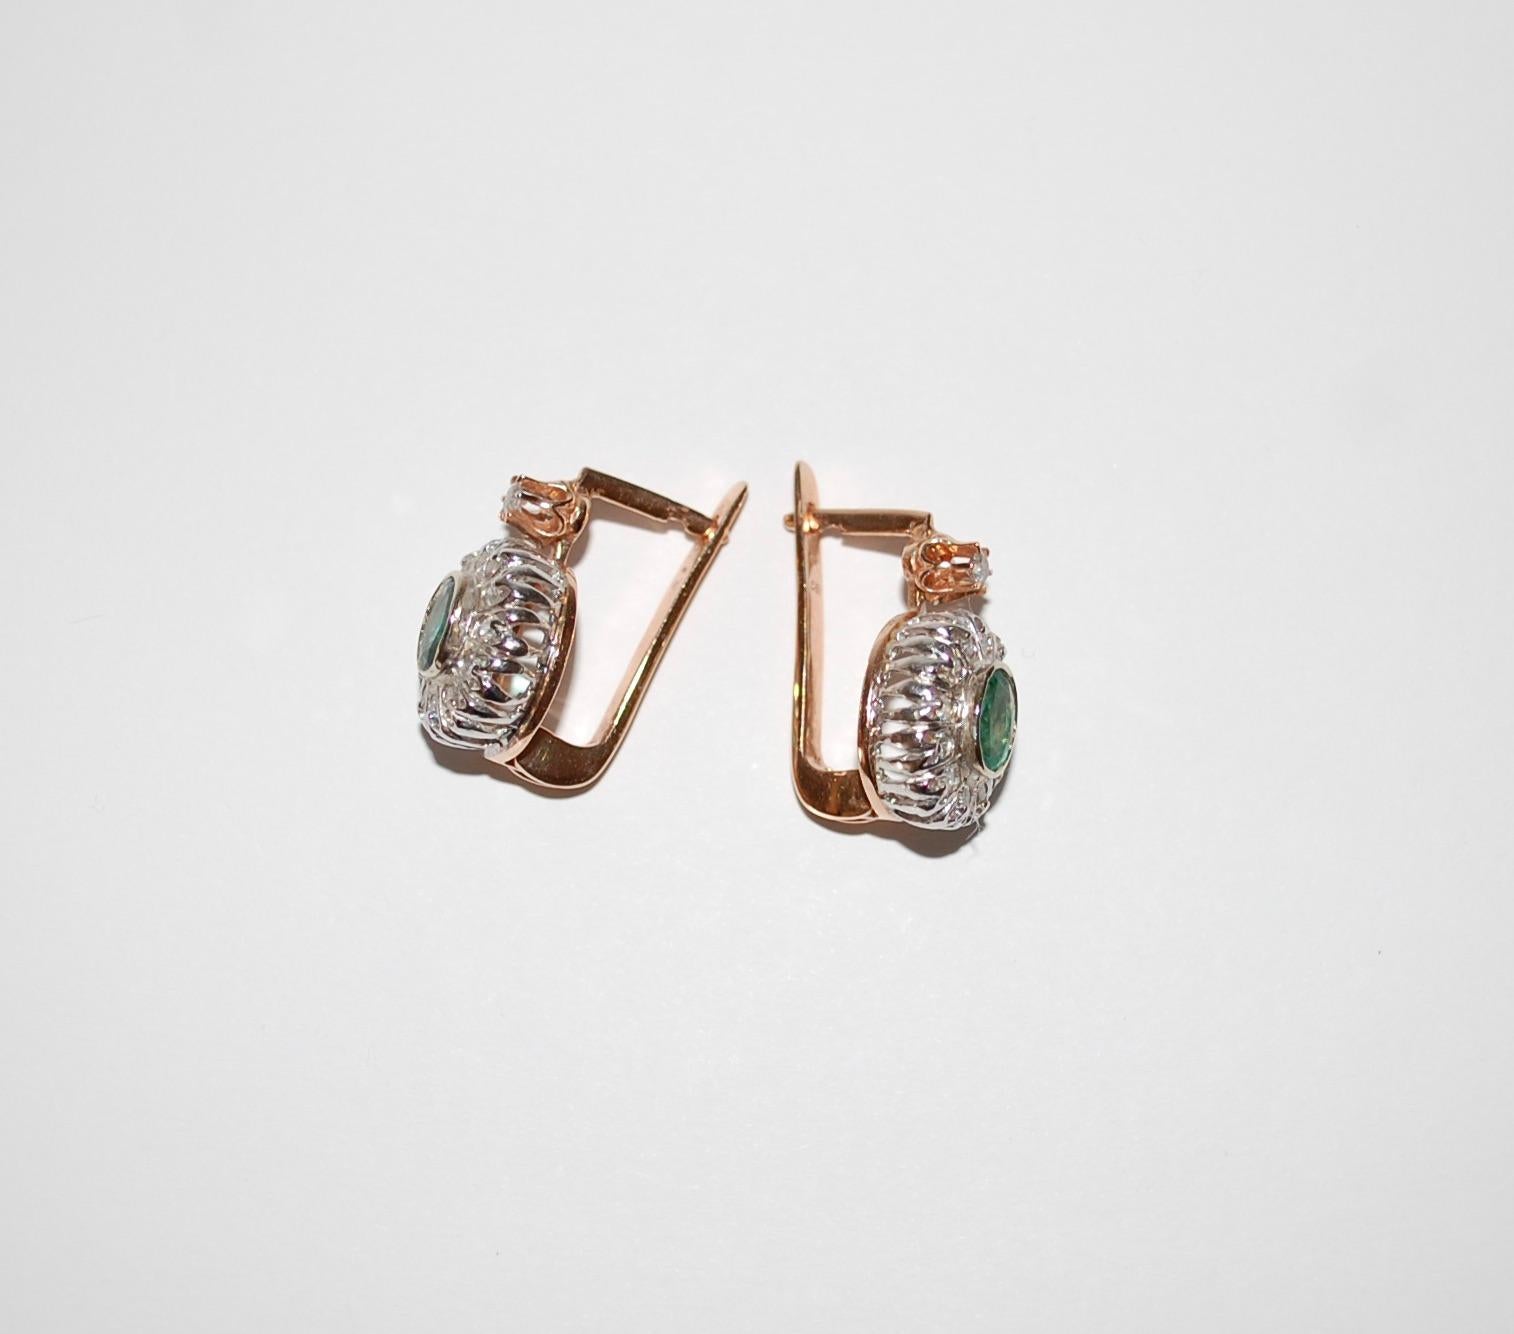 Antique Gold Emerald and Diamond Earrings and Ring For Sale 2